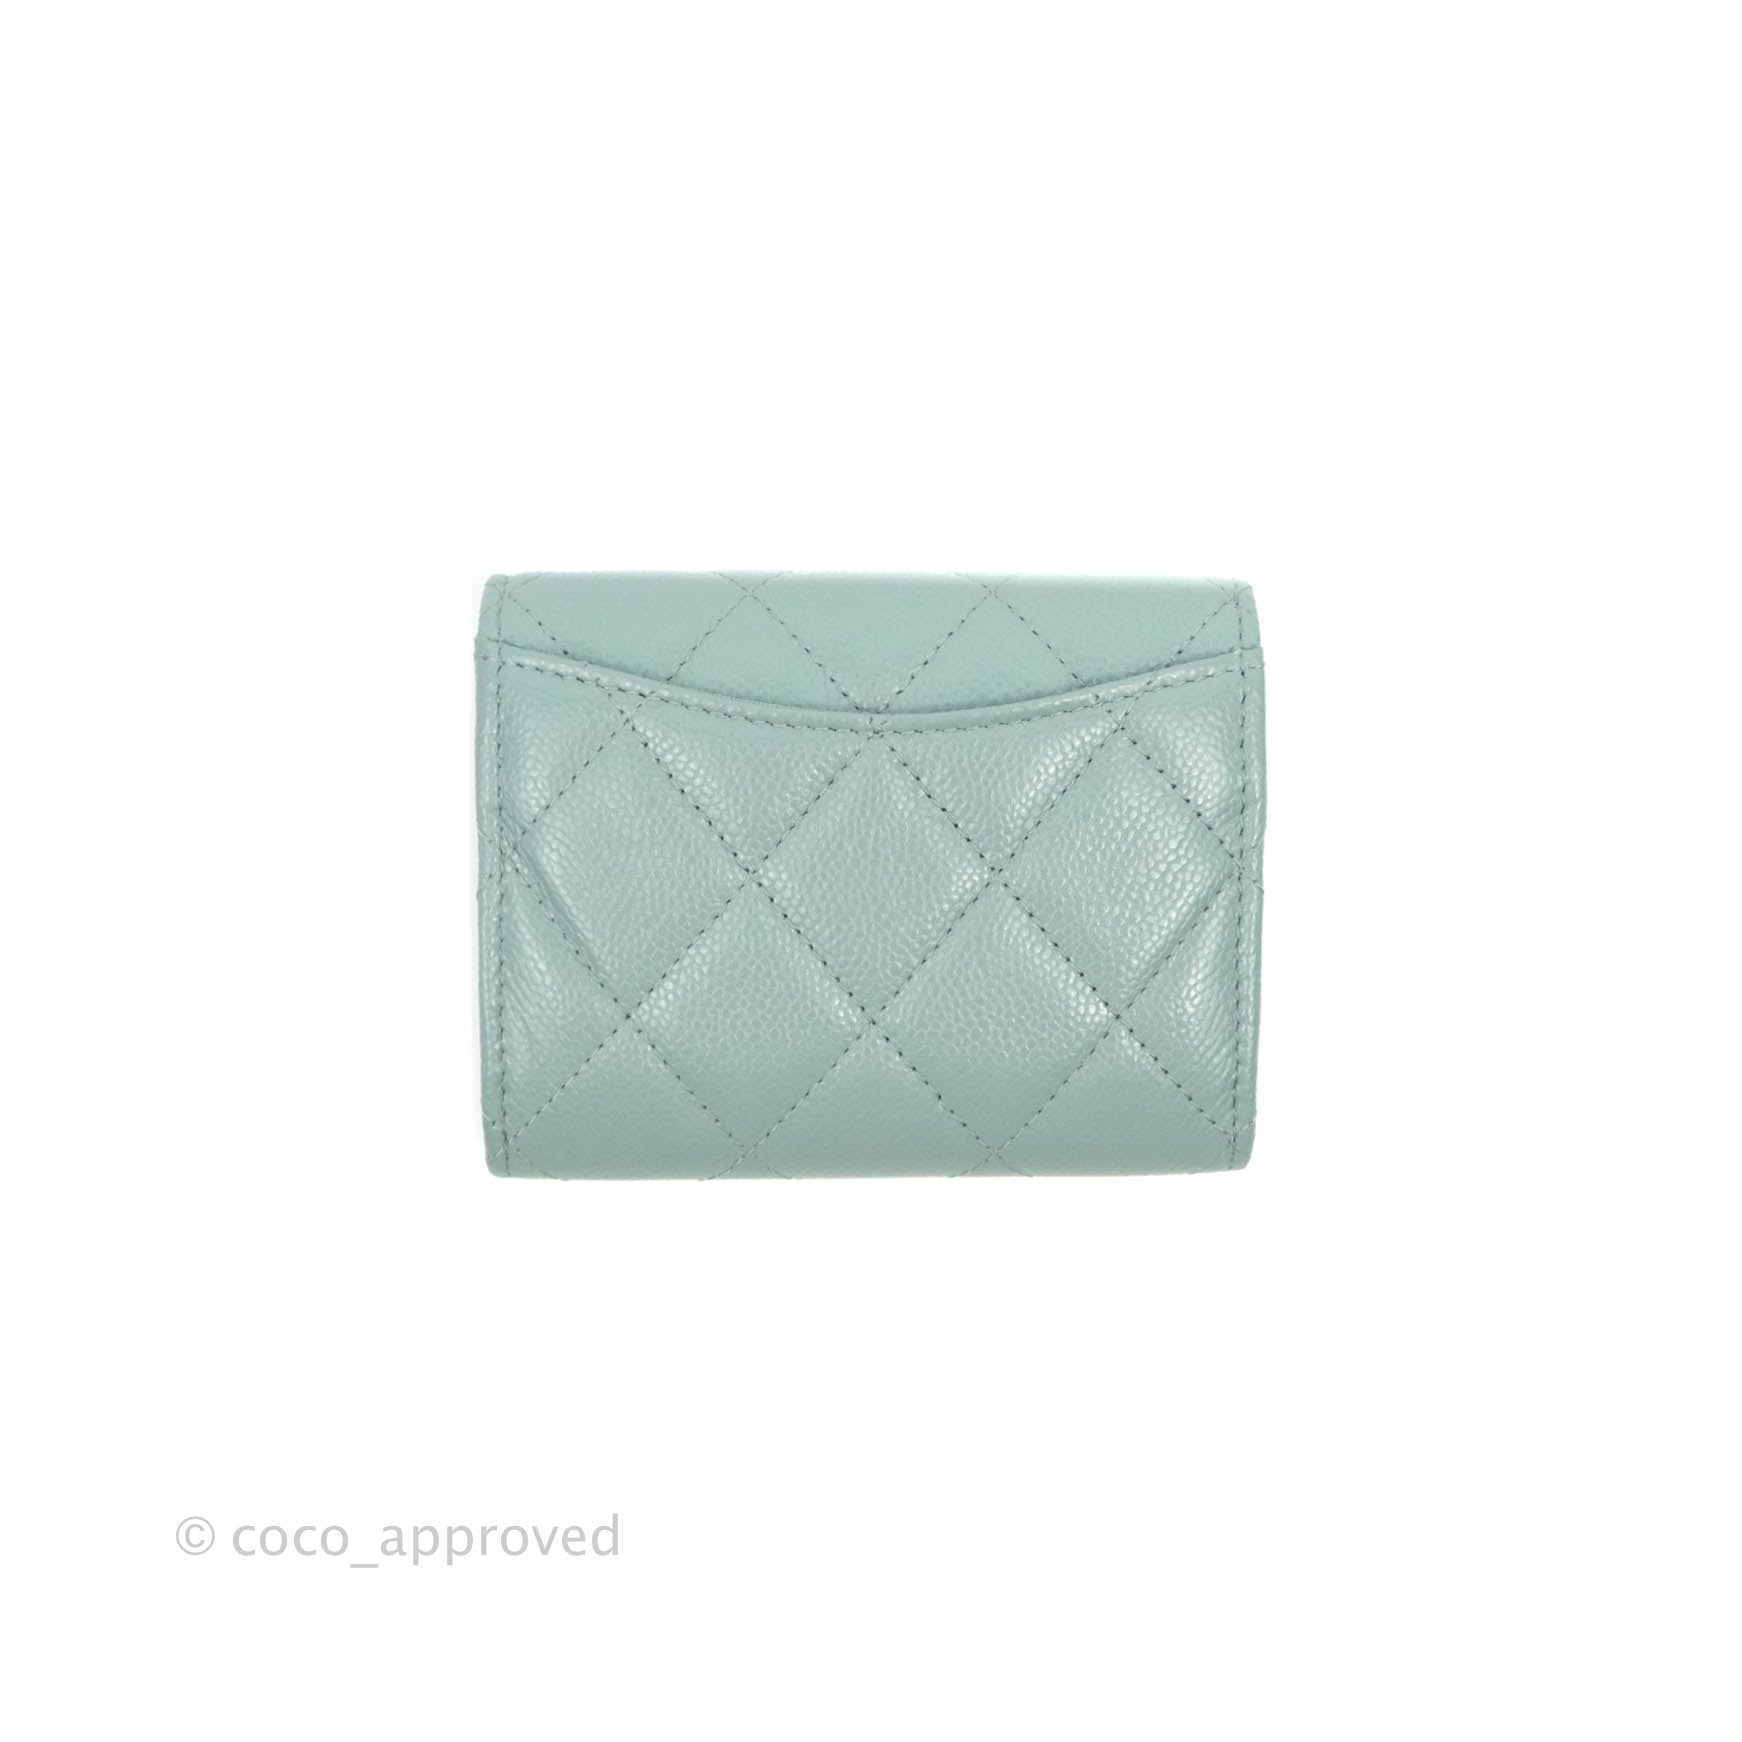 small chanel wallet on